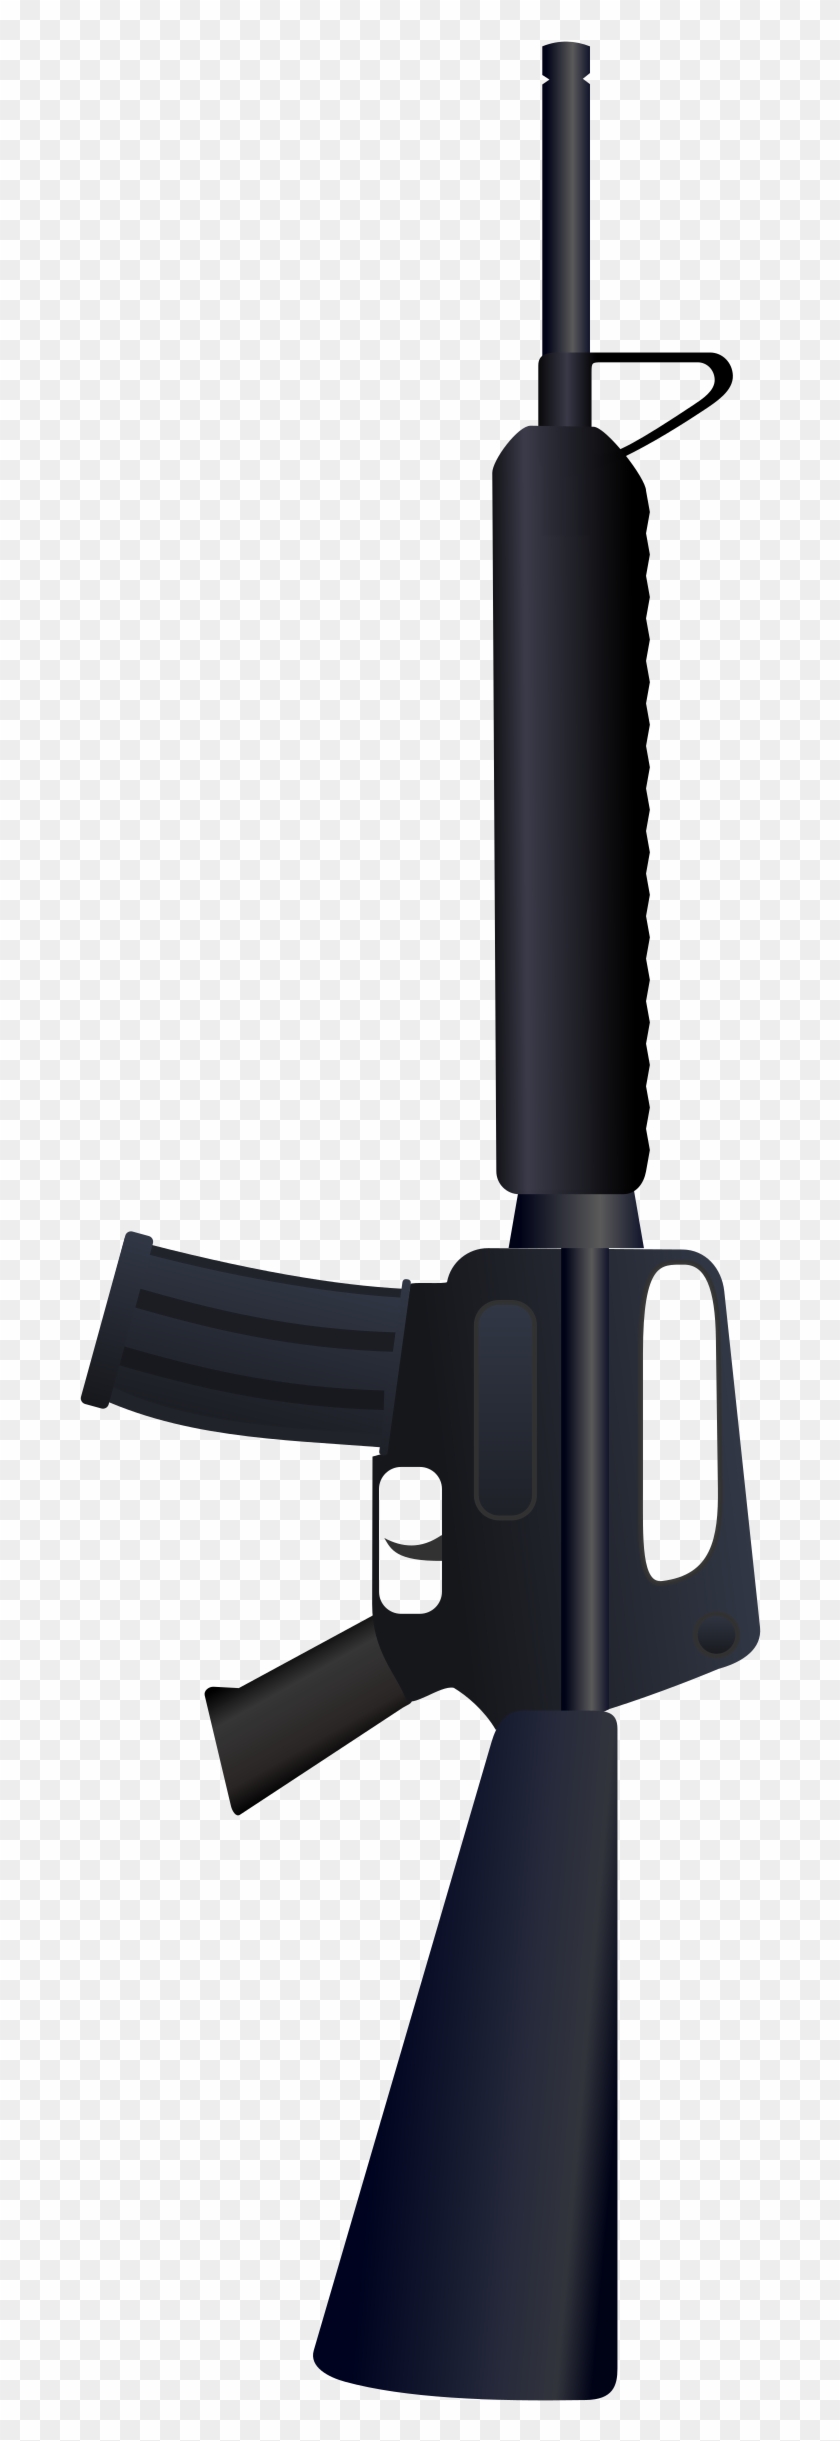 This Free Icons Png Design Of Colt Ar 15 / M 16 - Assault Rifle Clipart #4372642